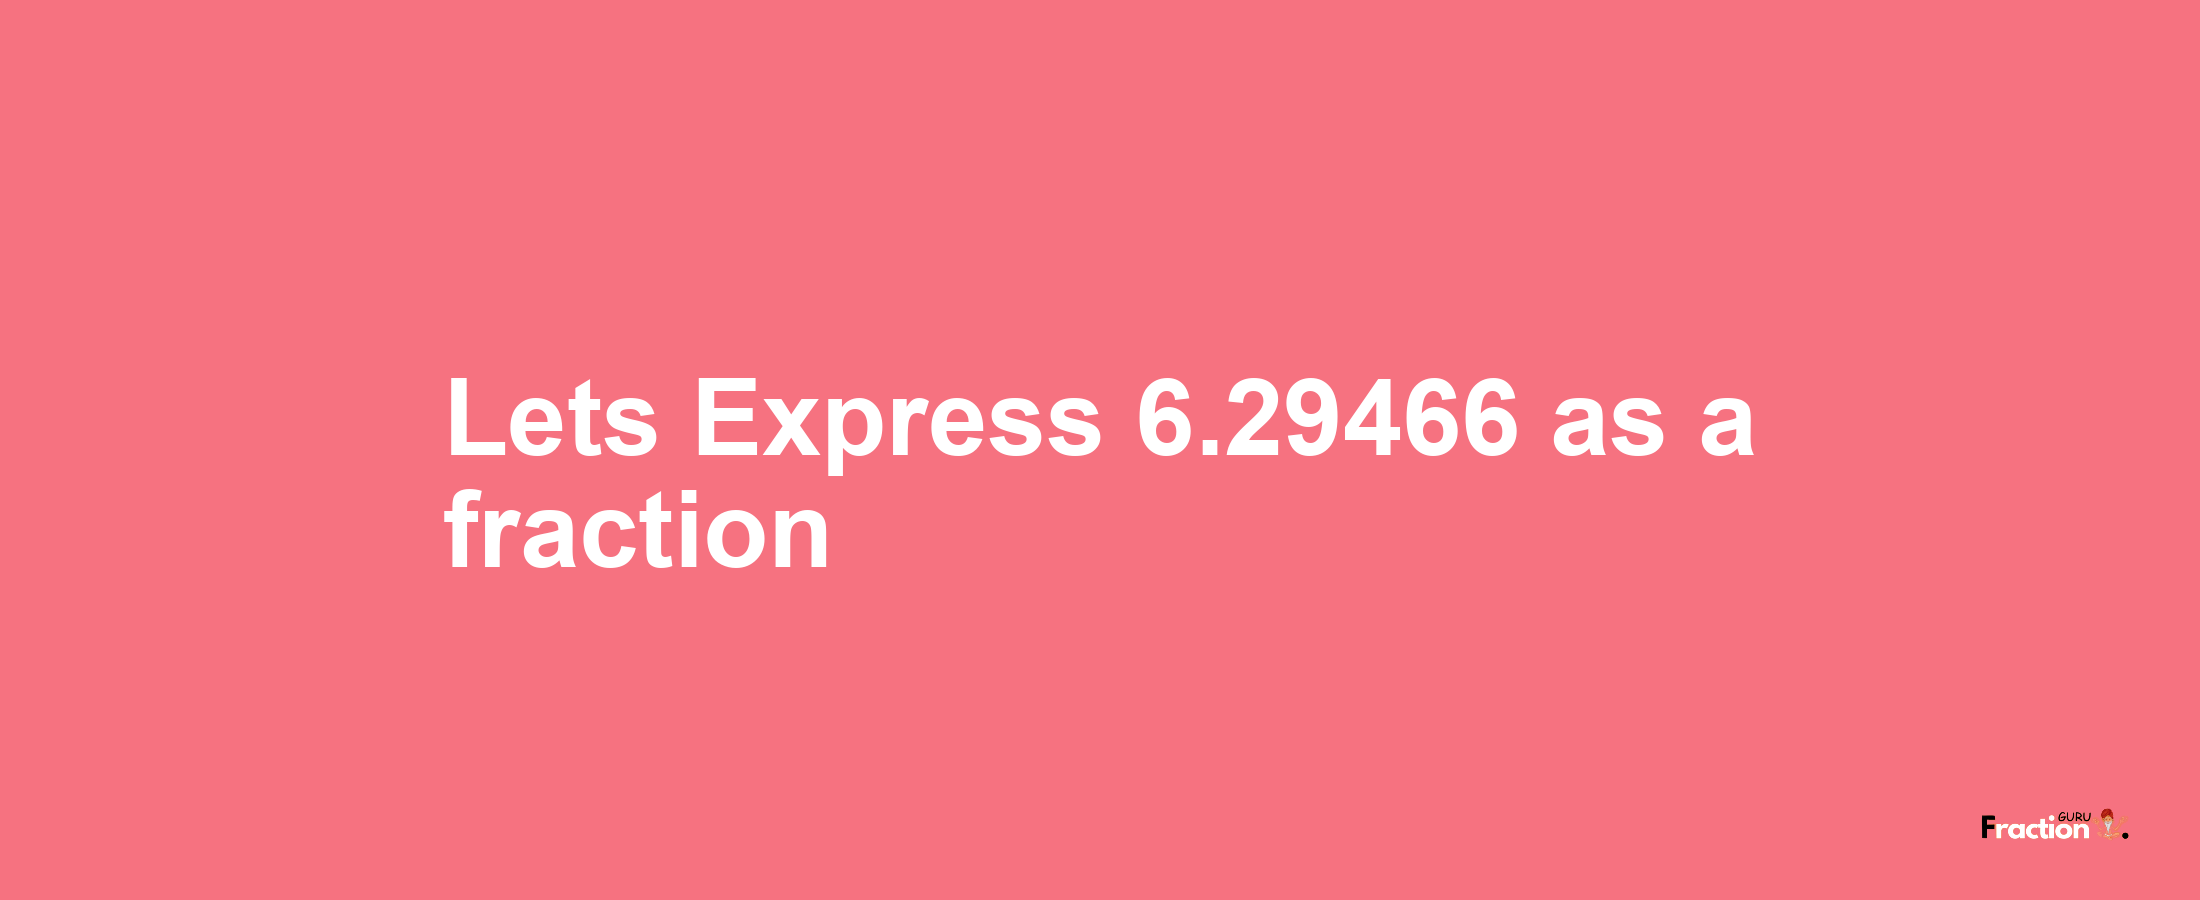 Lets Express 6.29466 as afraction